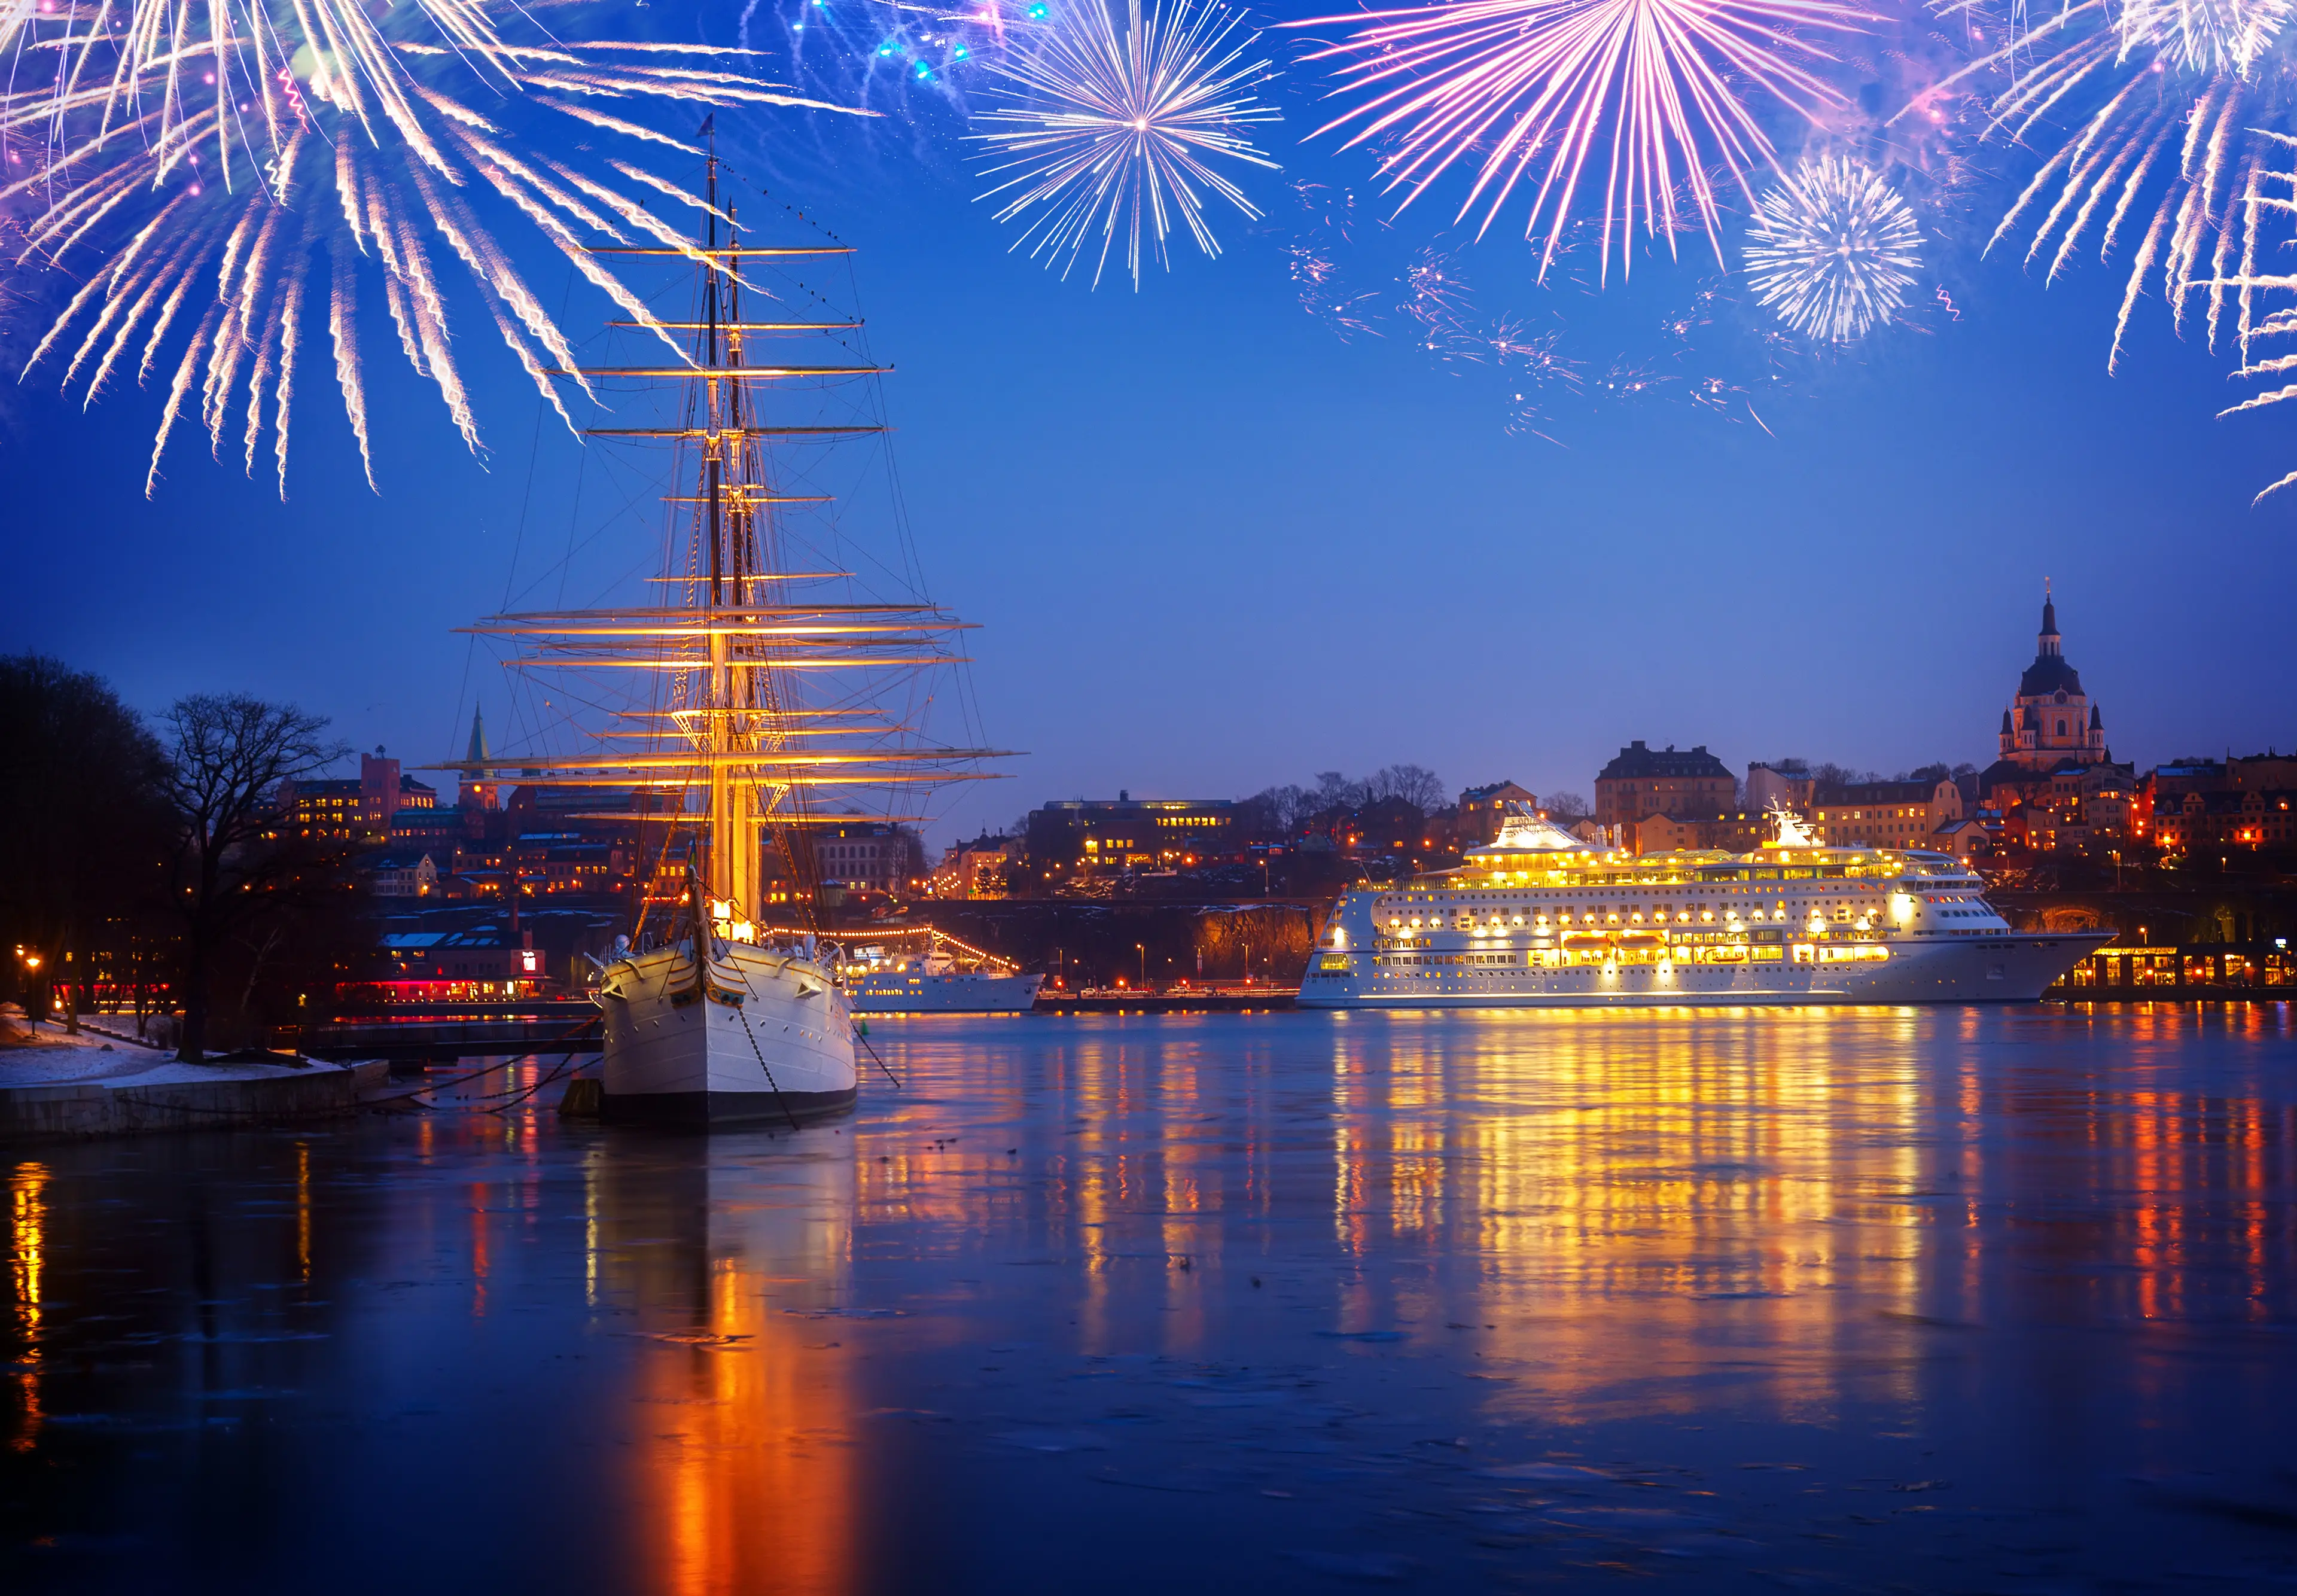 5-Day Family Christmas Holiday Itinerary in Stockholm, Sweden